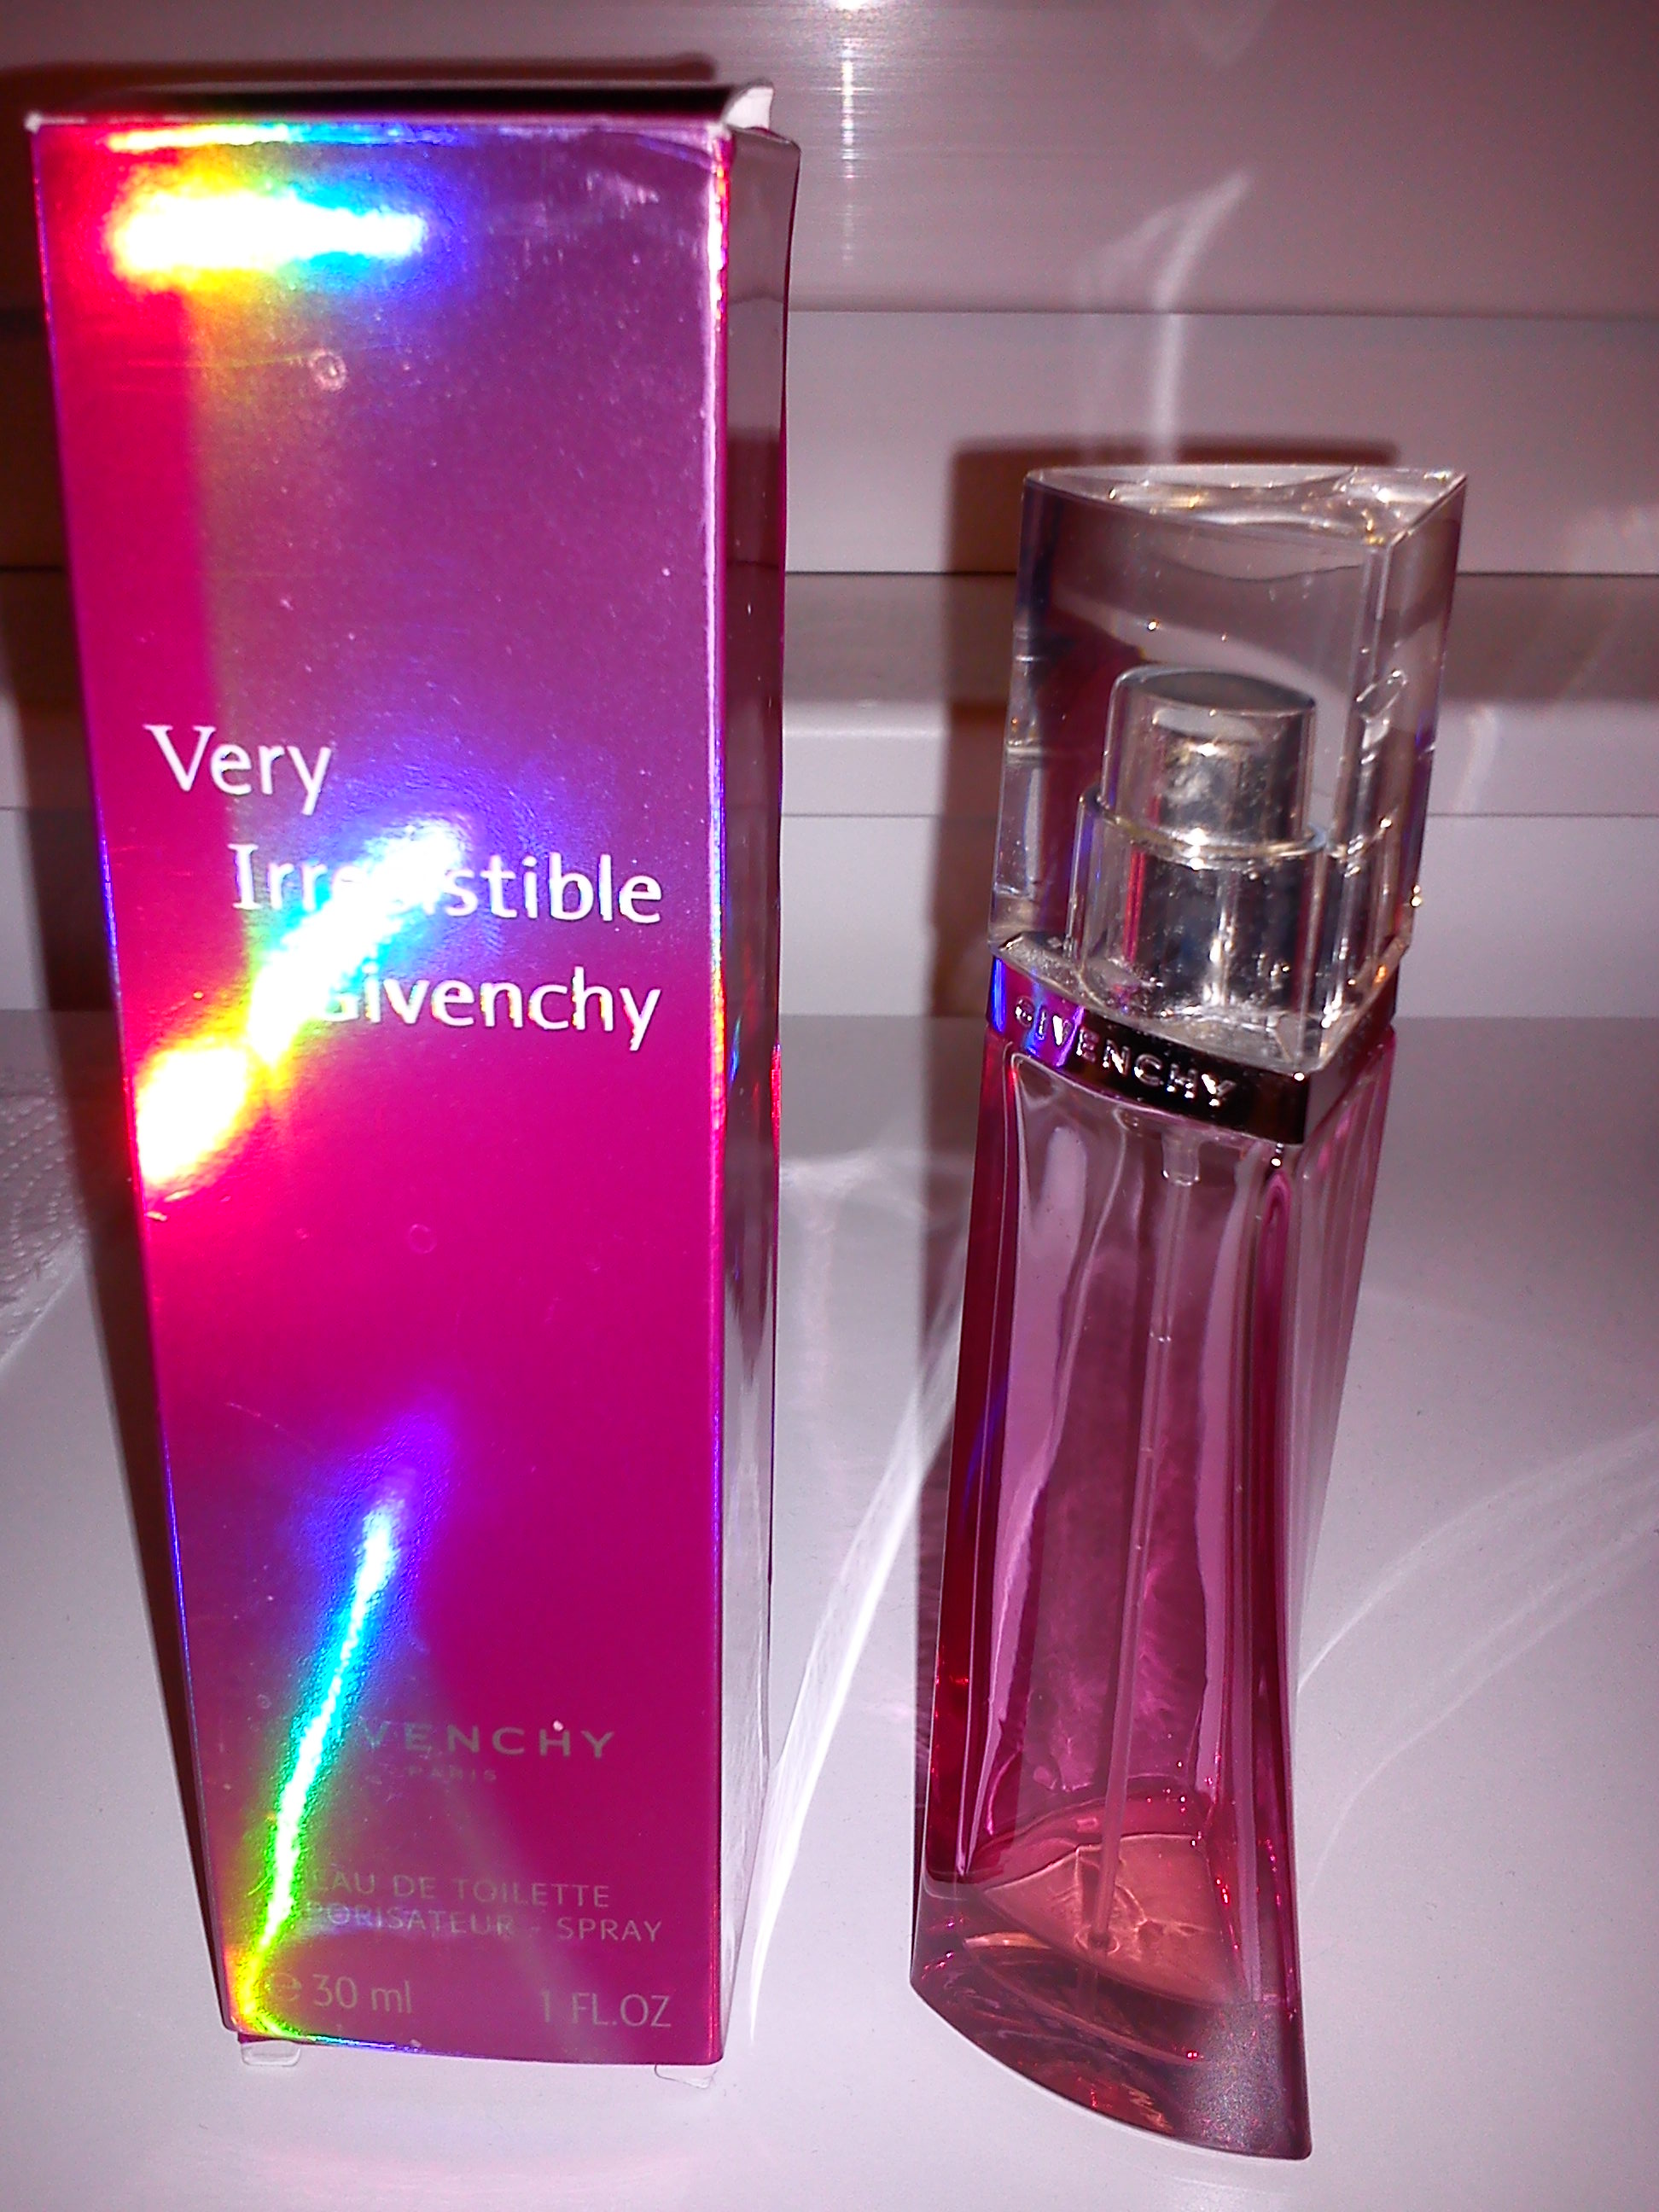 givenchy very irresistible review